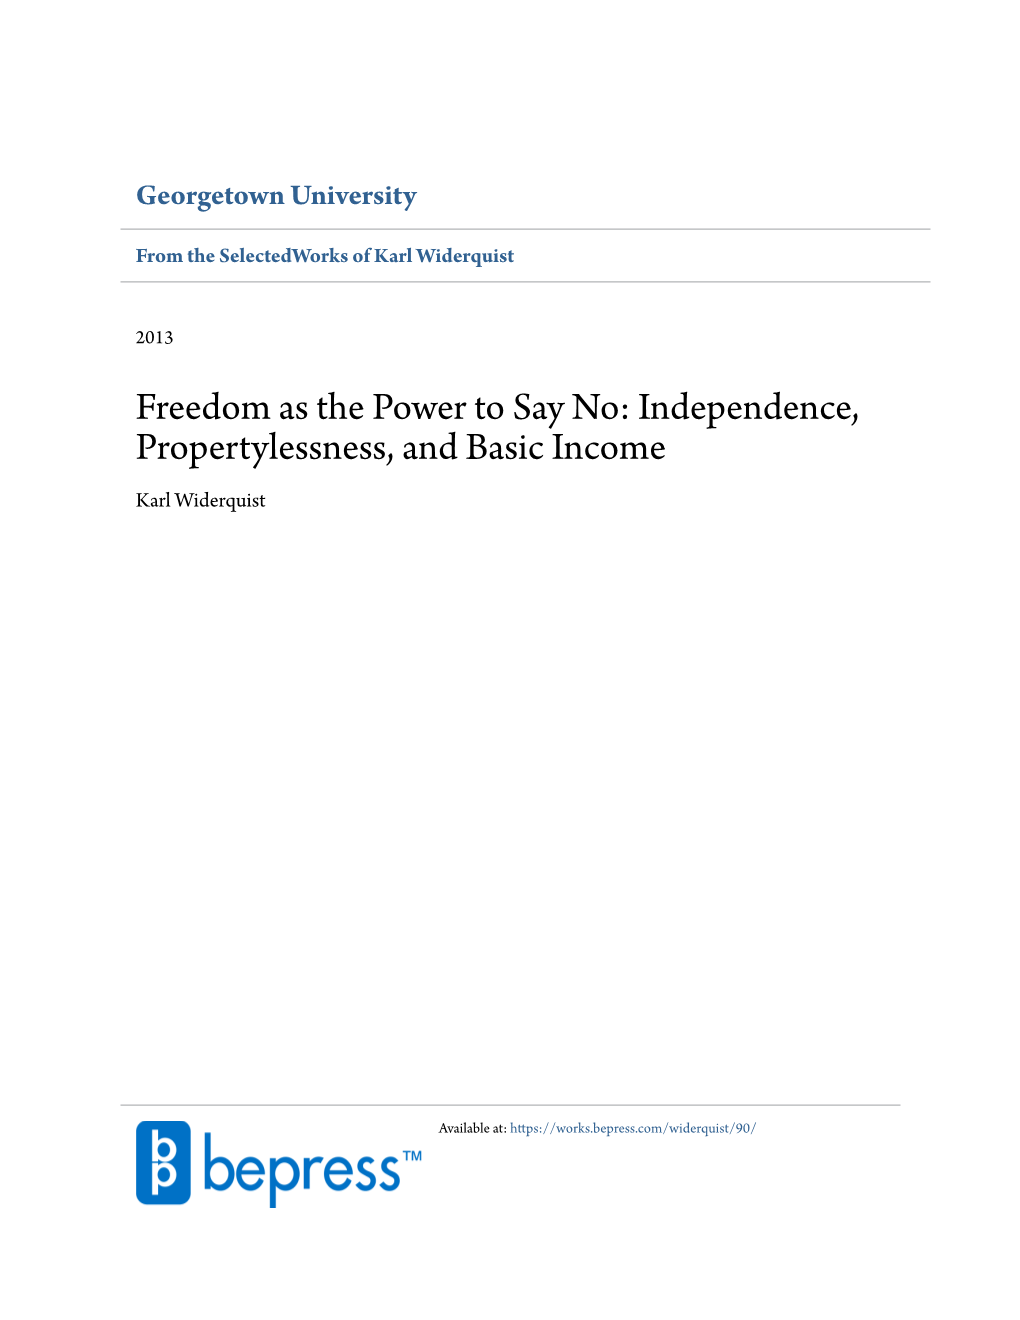 Independence, Propertylessness, and Basic Income Karl Widerquist